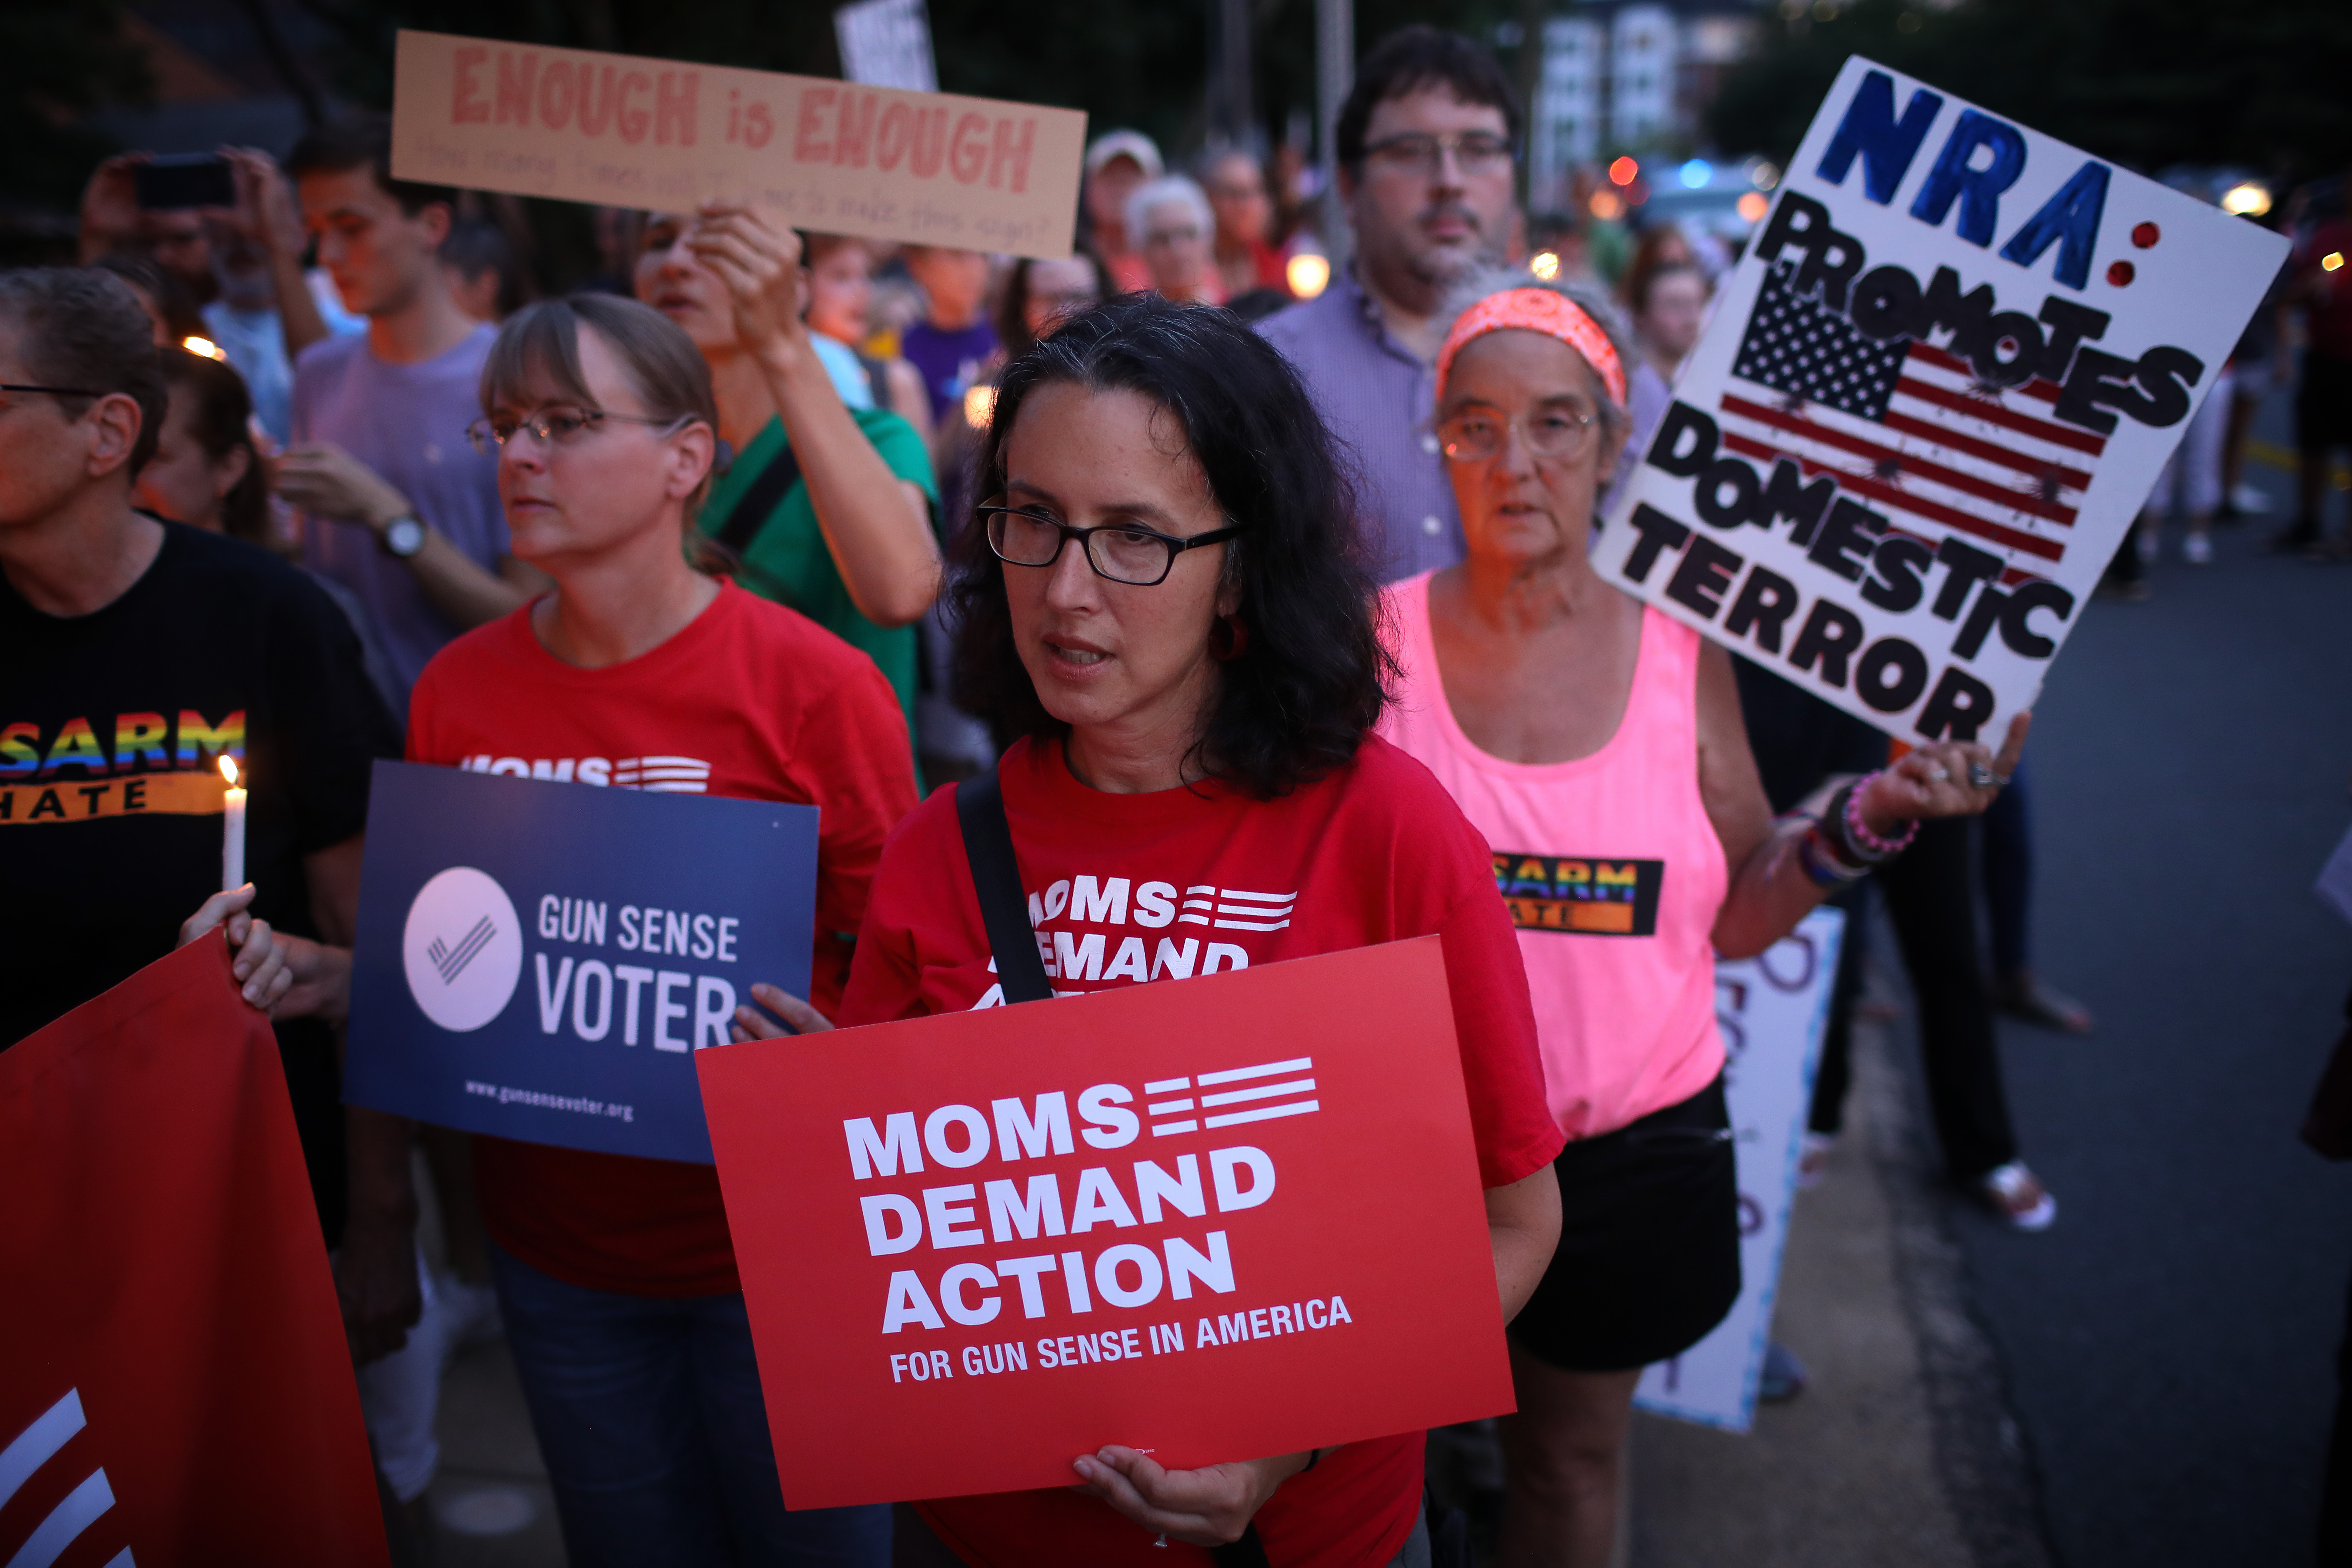 FAIRFAX, VIRGINIA - AUGUST 05: Advocates of gun reform legislation hold a candle light vigil for victims of recent mass shootings outside the headquarters of the National Rifle Association August 5, 2019 in Fairfax, Virginia. Thirty-one people have died following the two mass shootings over the weekend in El Paso, Texas and Dayton, Ohio. (Photo by Win McNamee/Getty Images)